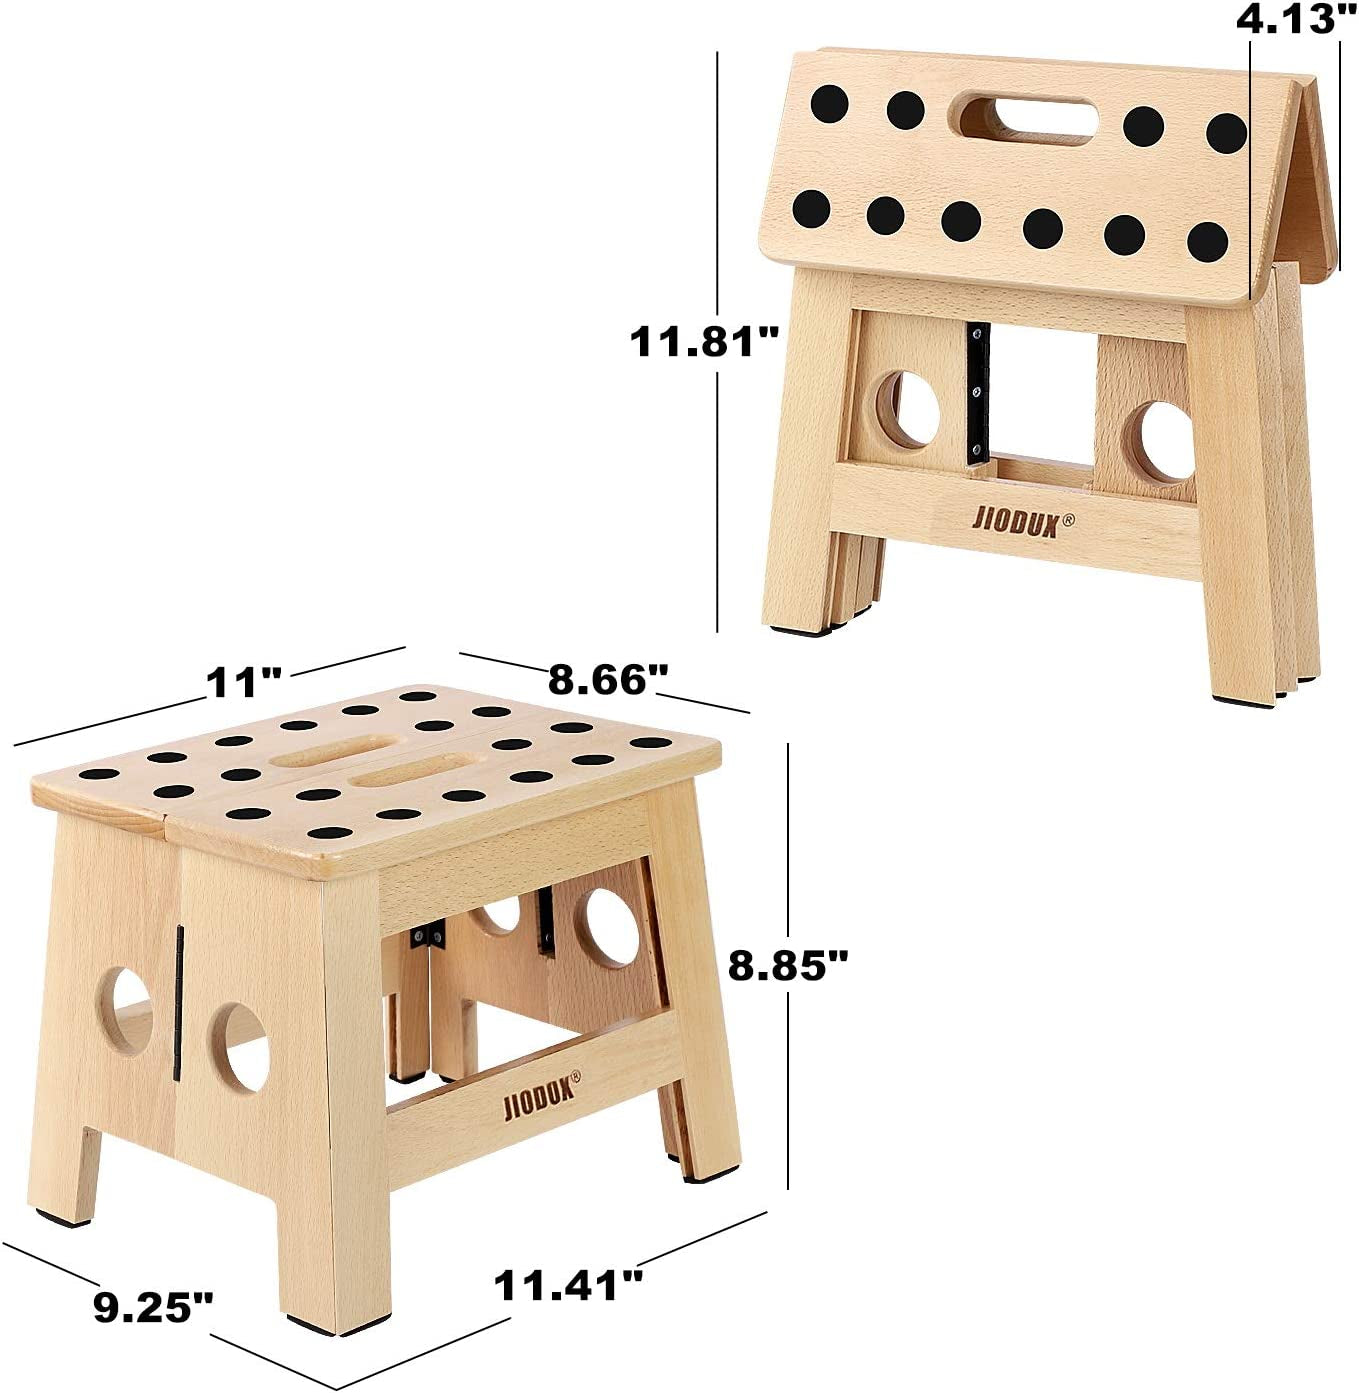 Wooden Step Stool, Non Slip Foldable Step Stool for Kids, Small Wood Stool Perfect for Kitchens Bedrooms Kids Rooms-Patented Product